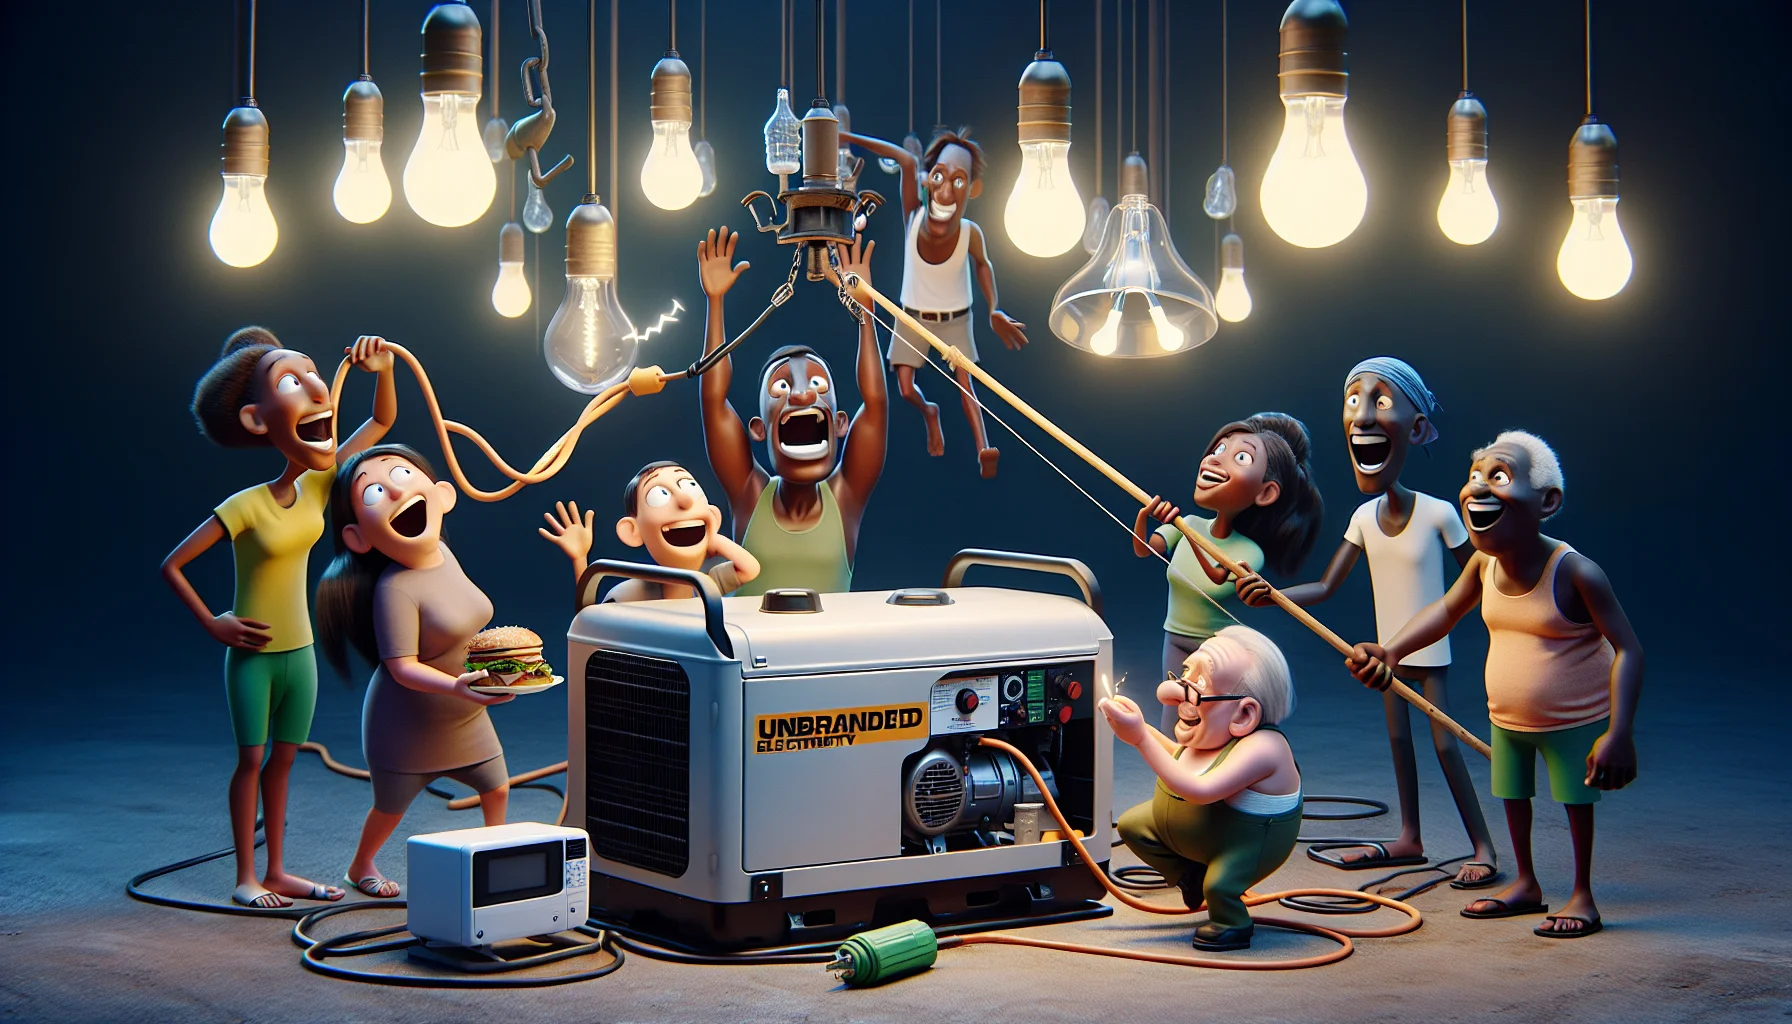 Imagine a humorous scene featuring an unbranded electricity generator known for its reliability. Several animated characters, some humanoid and some abstract shapes, are huddling around it, their eyes wide with anticipation. A Caucasian woman with joyful expression, holds a large plug, about to connect it to the generator. A South Asian man stands by with a microwave, ready to heat his lunch. An elderly Black man laughs heartily as he dangles a chandelier from a fishing rod, eager to hook it to this power source. Lightbulbs hanging above them illuminate when the generator starts, signifying their delight and satisfaction with their power solution.